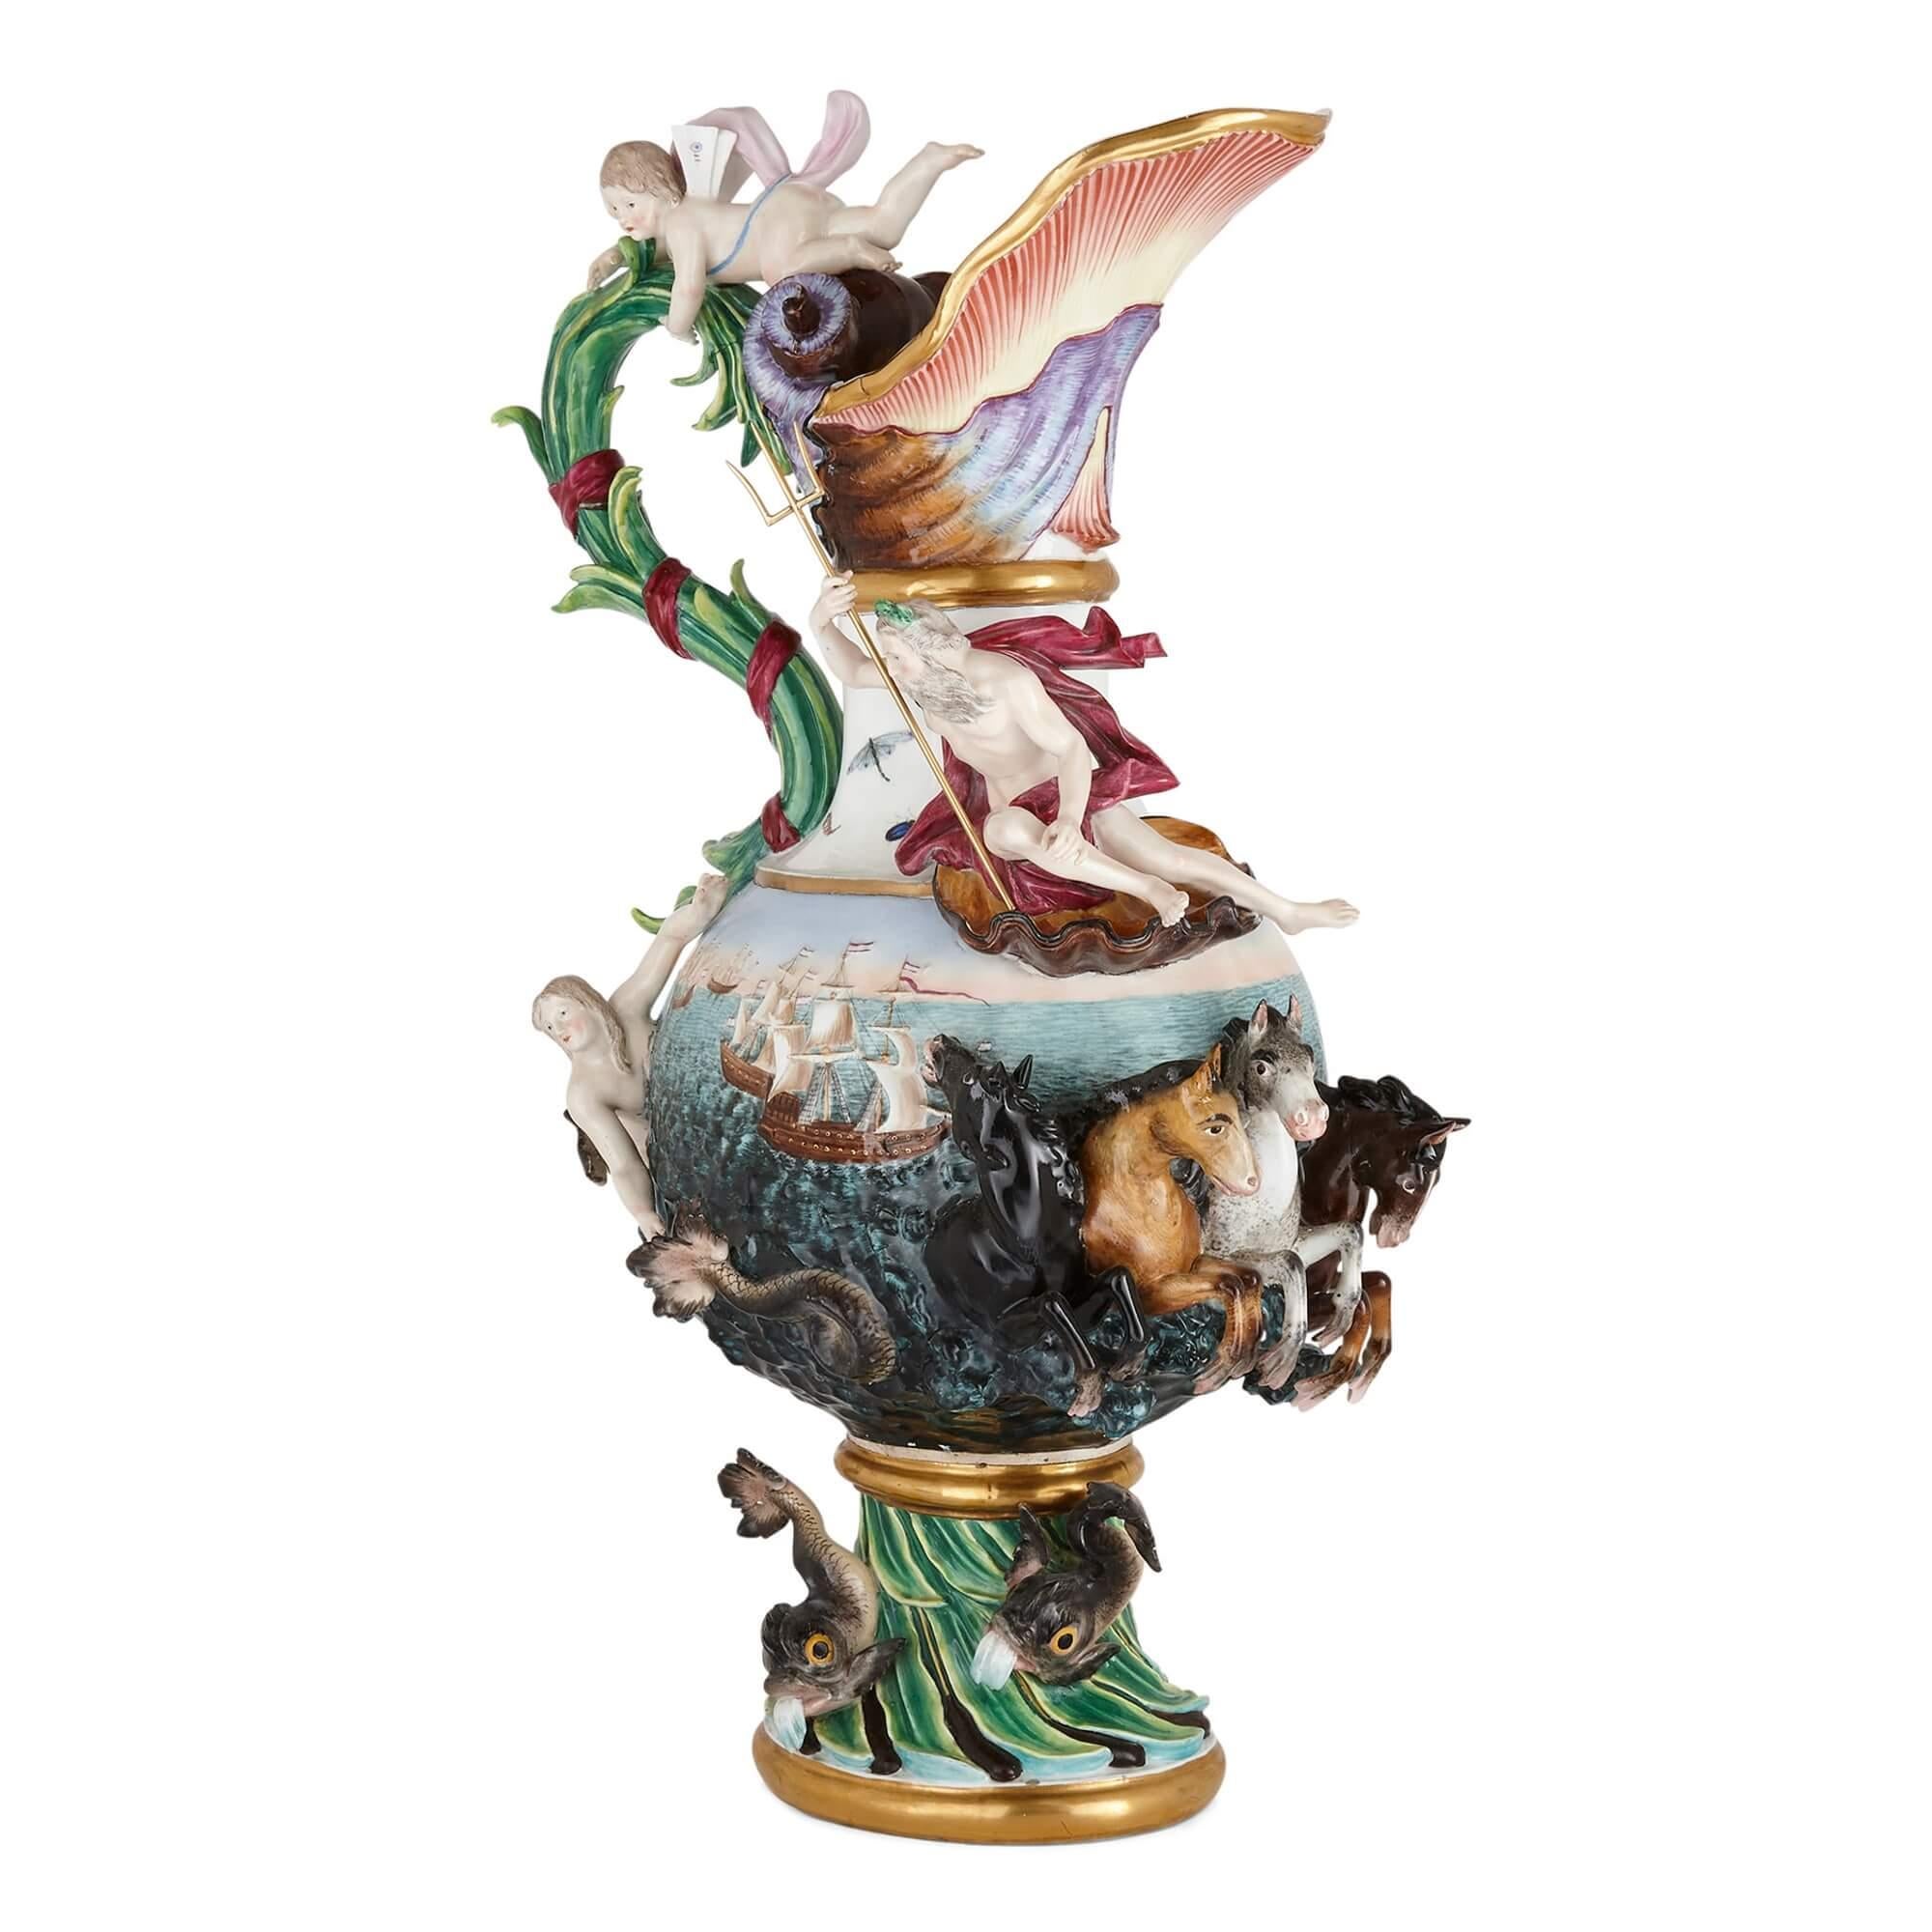 Large porcelain ‘Water’ ewer from the ‘Elements’ series by Meissen
German, 19th Century 
Height 61cm, width 36cm, depth 23cm

With sensational design elements, this Meissen jug boasts incredible artistry of design. The ewer, which emblematises